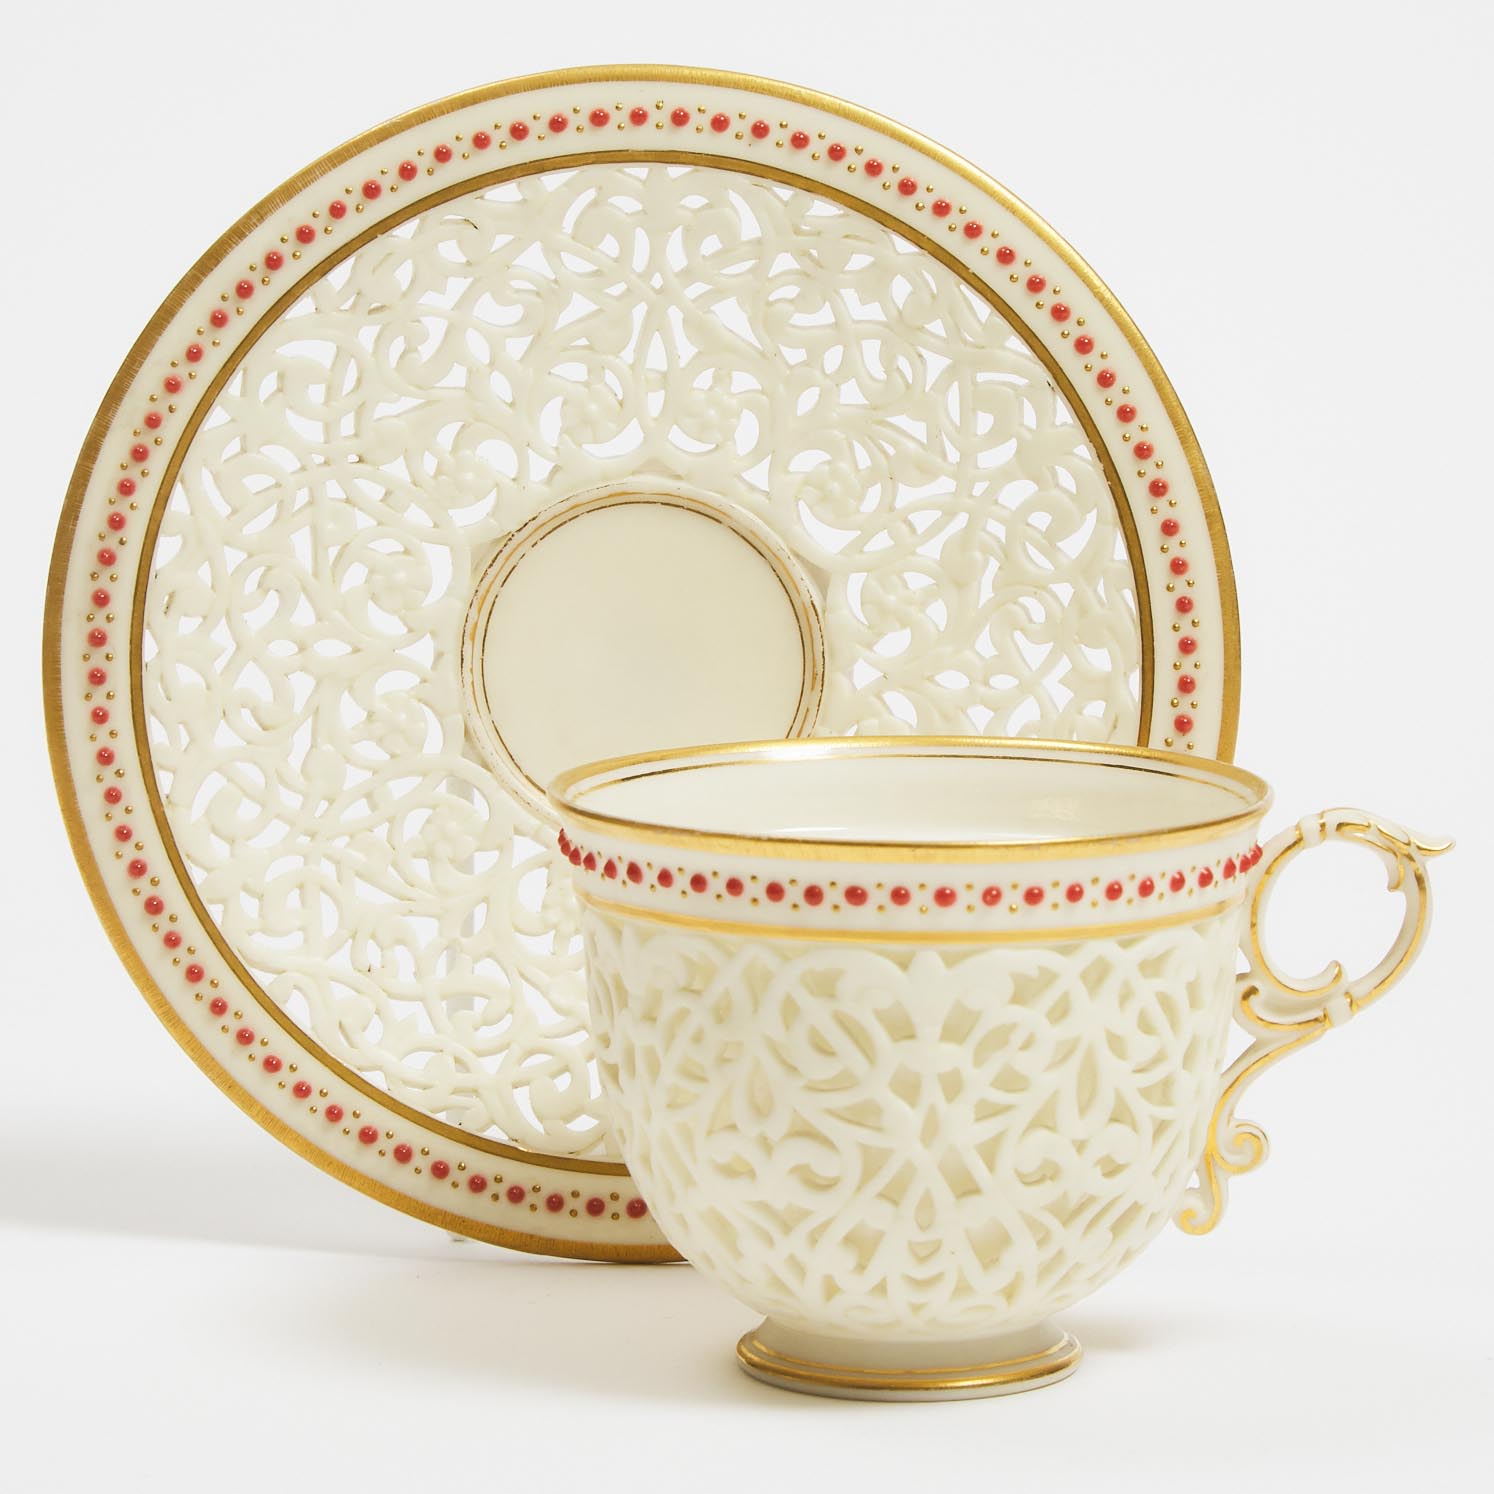 Grainger & Co. Worcester 'Jeweled' and Reticulated Cup and Saucer, c.1892